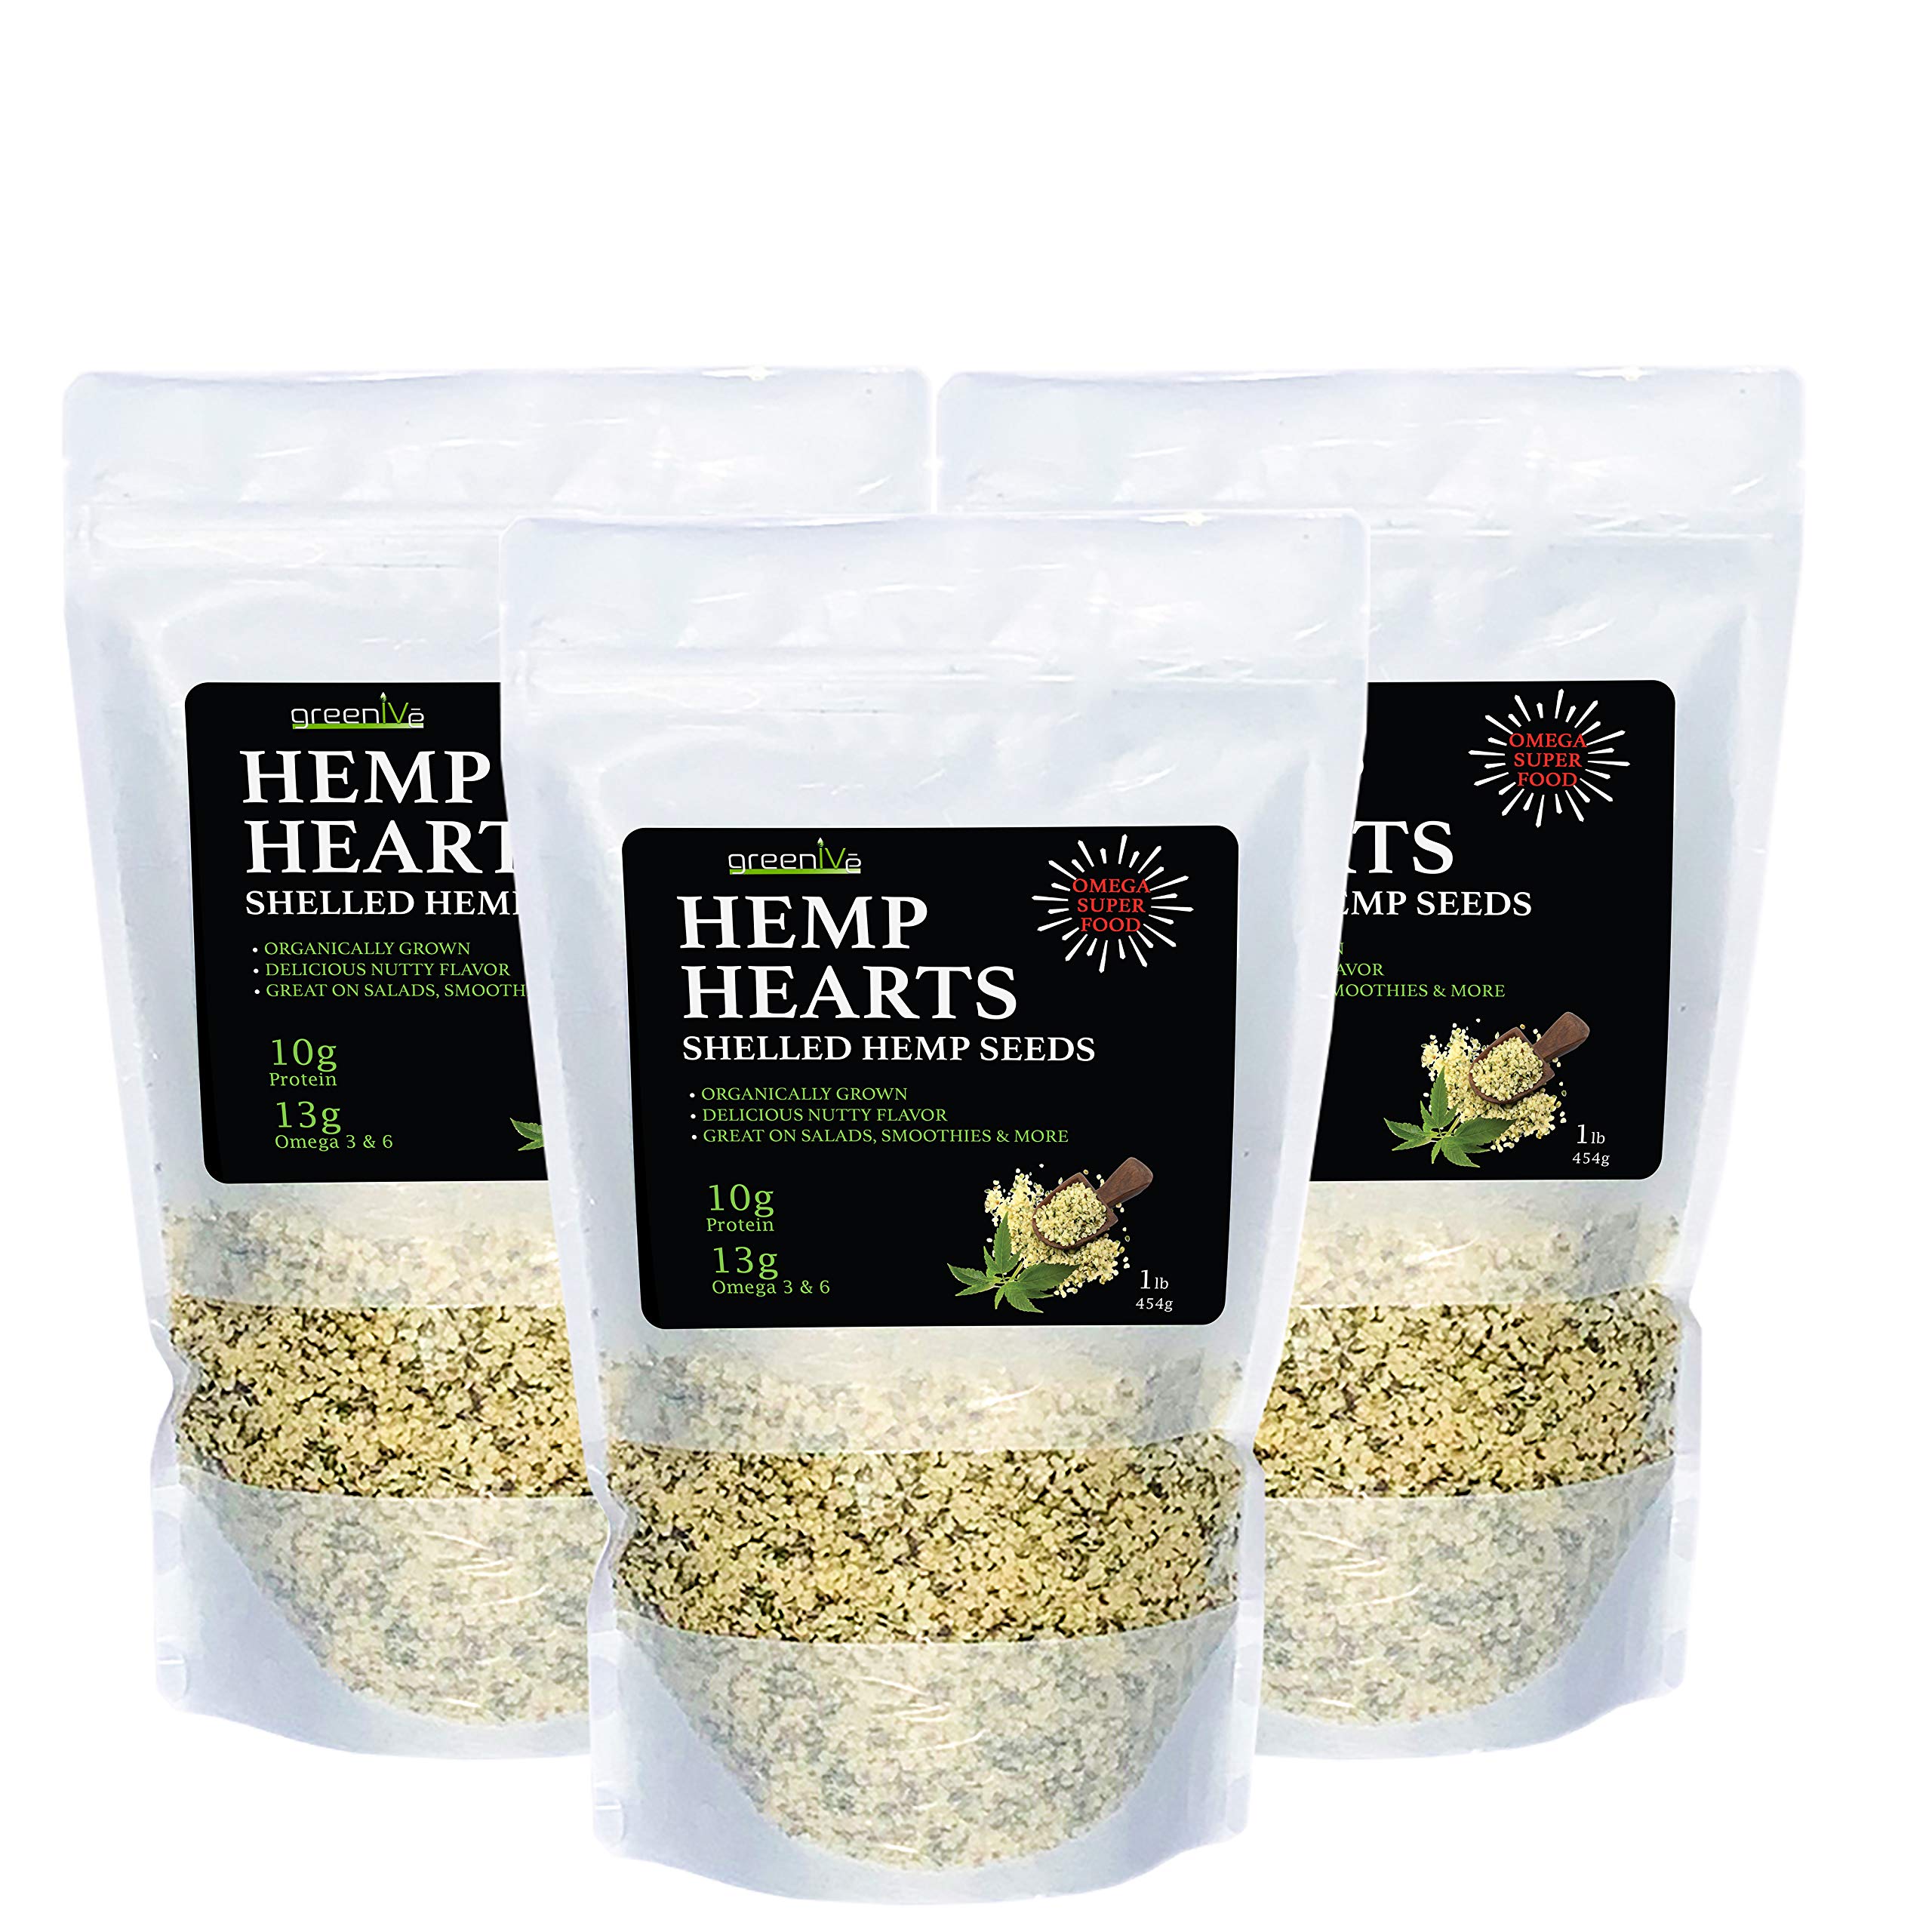 GreenIVe - Hemp Hearts - Hulled Hemp Seeds - Protein + Fiber - Exclusively  on  (3 Pound) 1 Pound (Pack of 3)